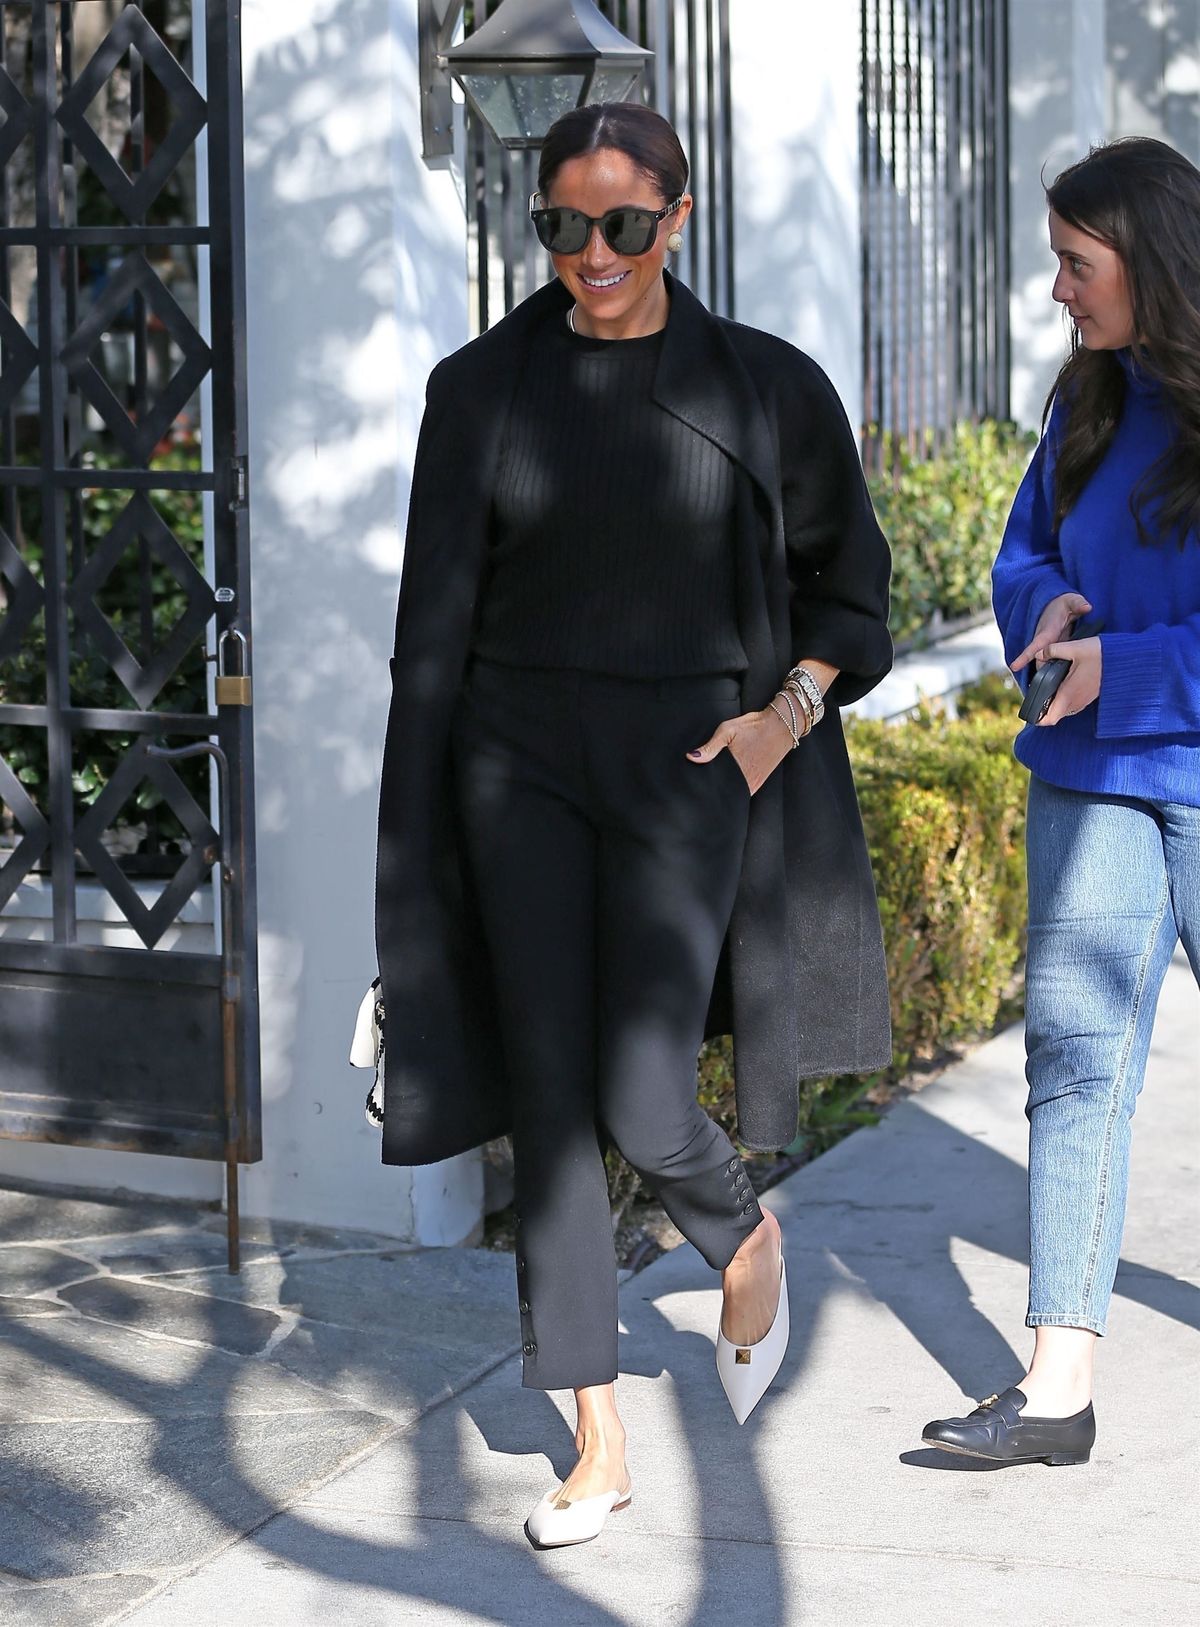 Meghan Markle in Max Mara Coat & Chanel Bag @ West Hollywood Int Womens Day  2023